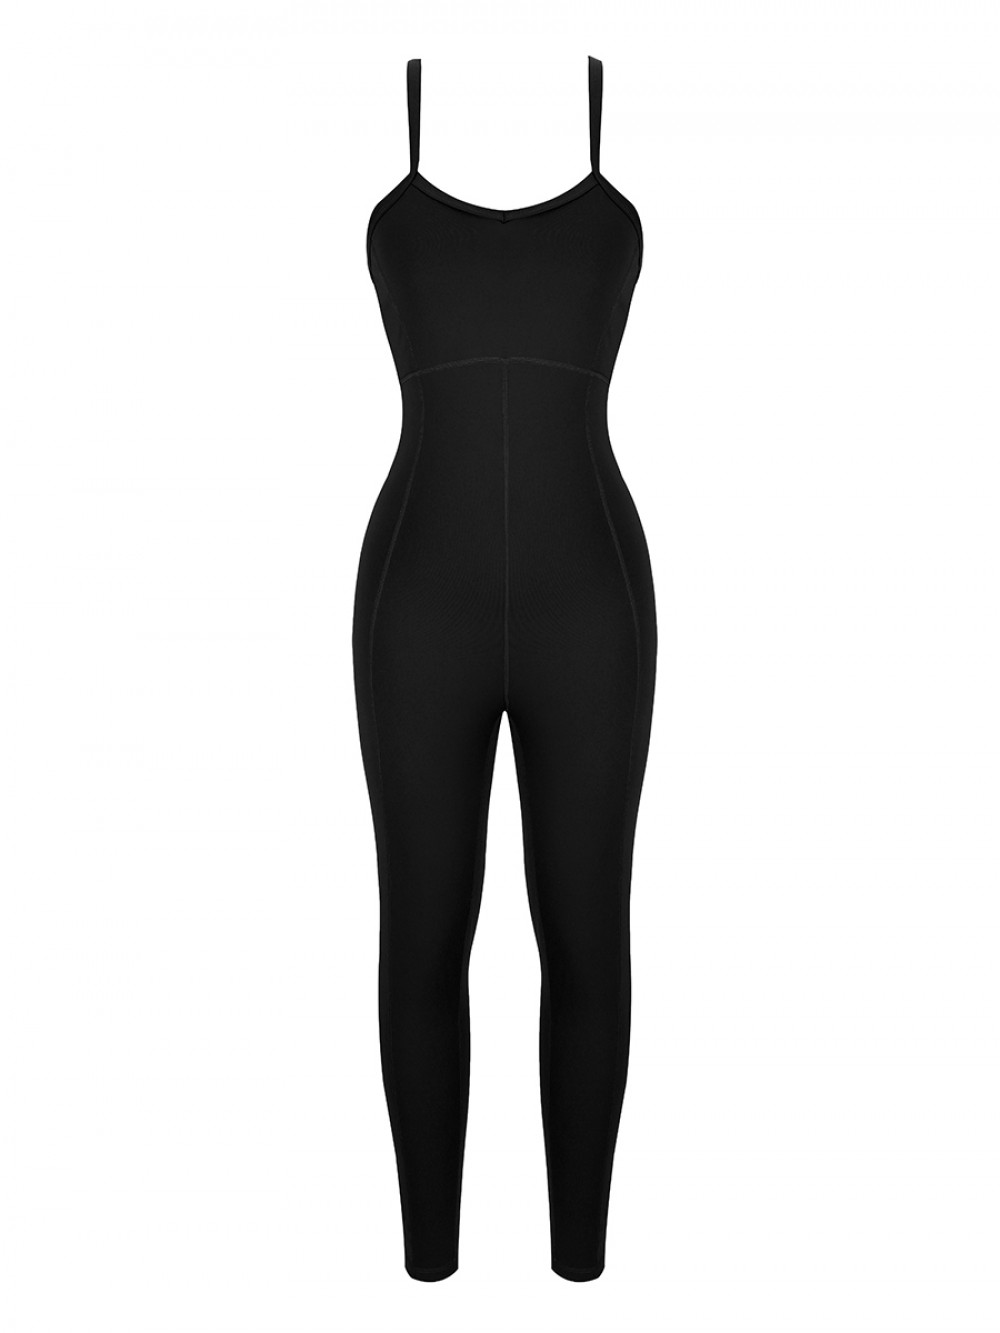 Black Strappy Back Removable Pads Yoga Bodysuit Quick Drying